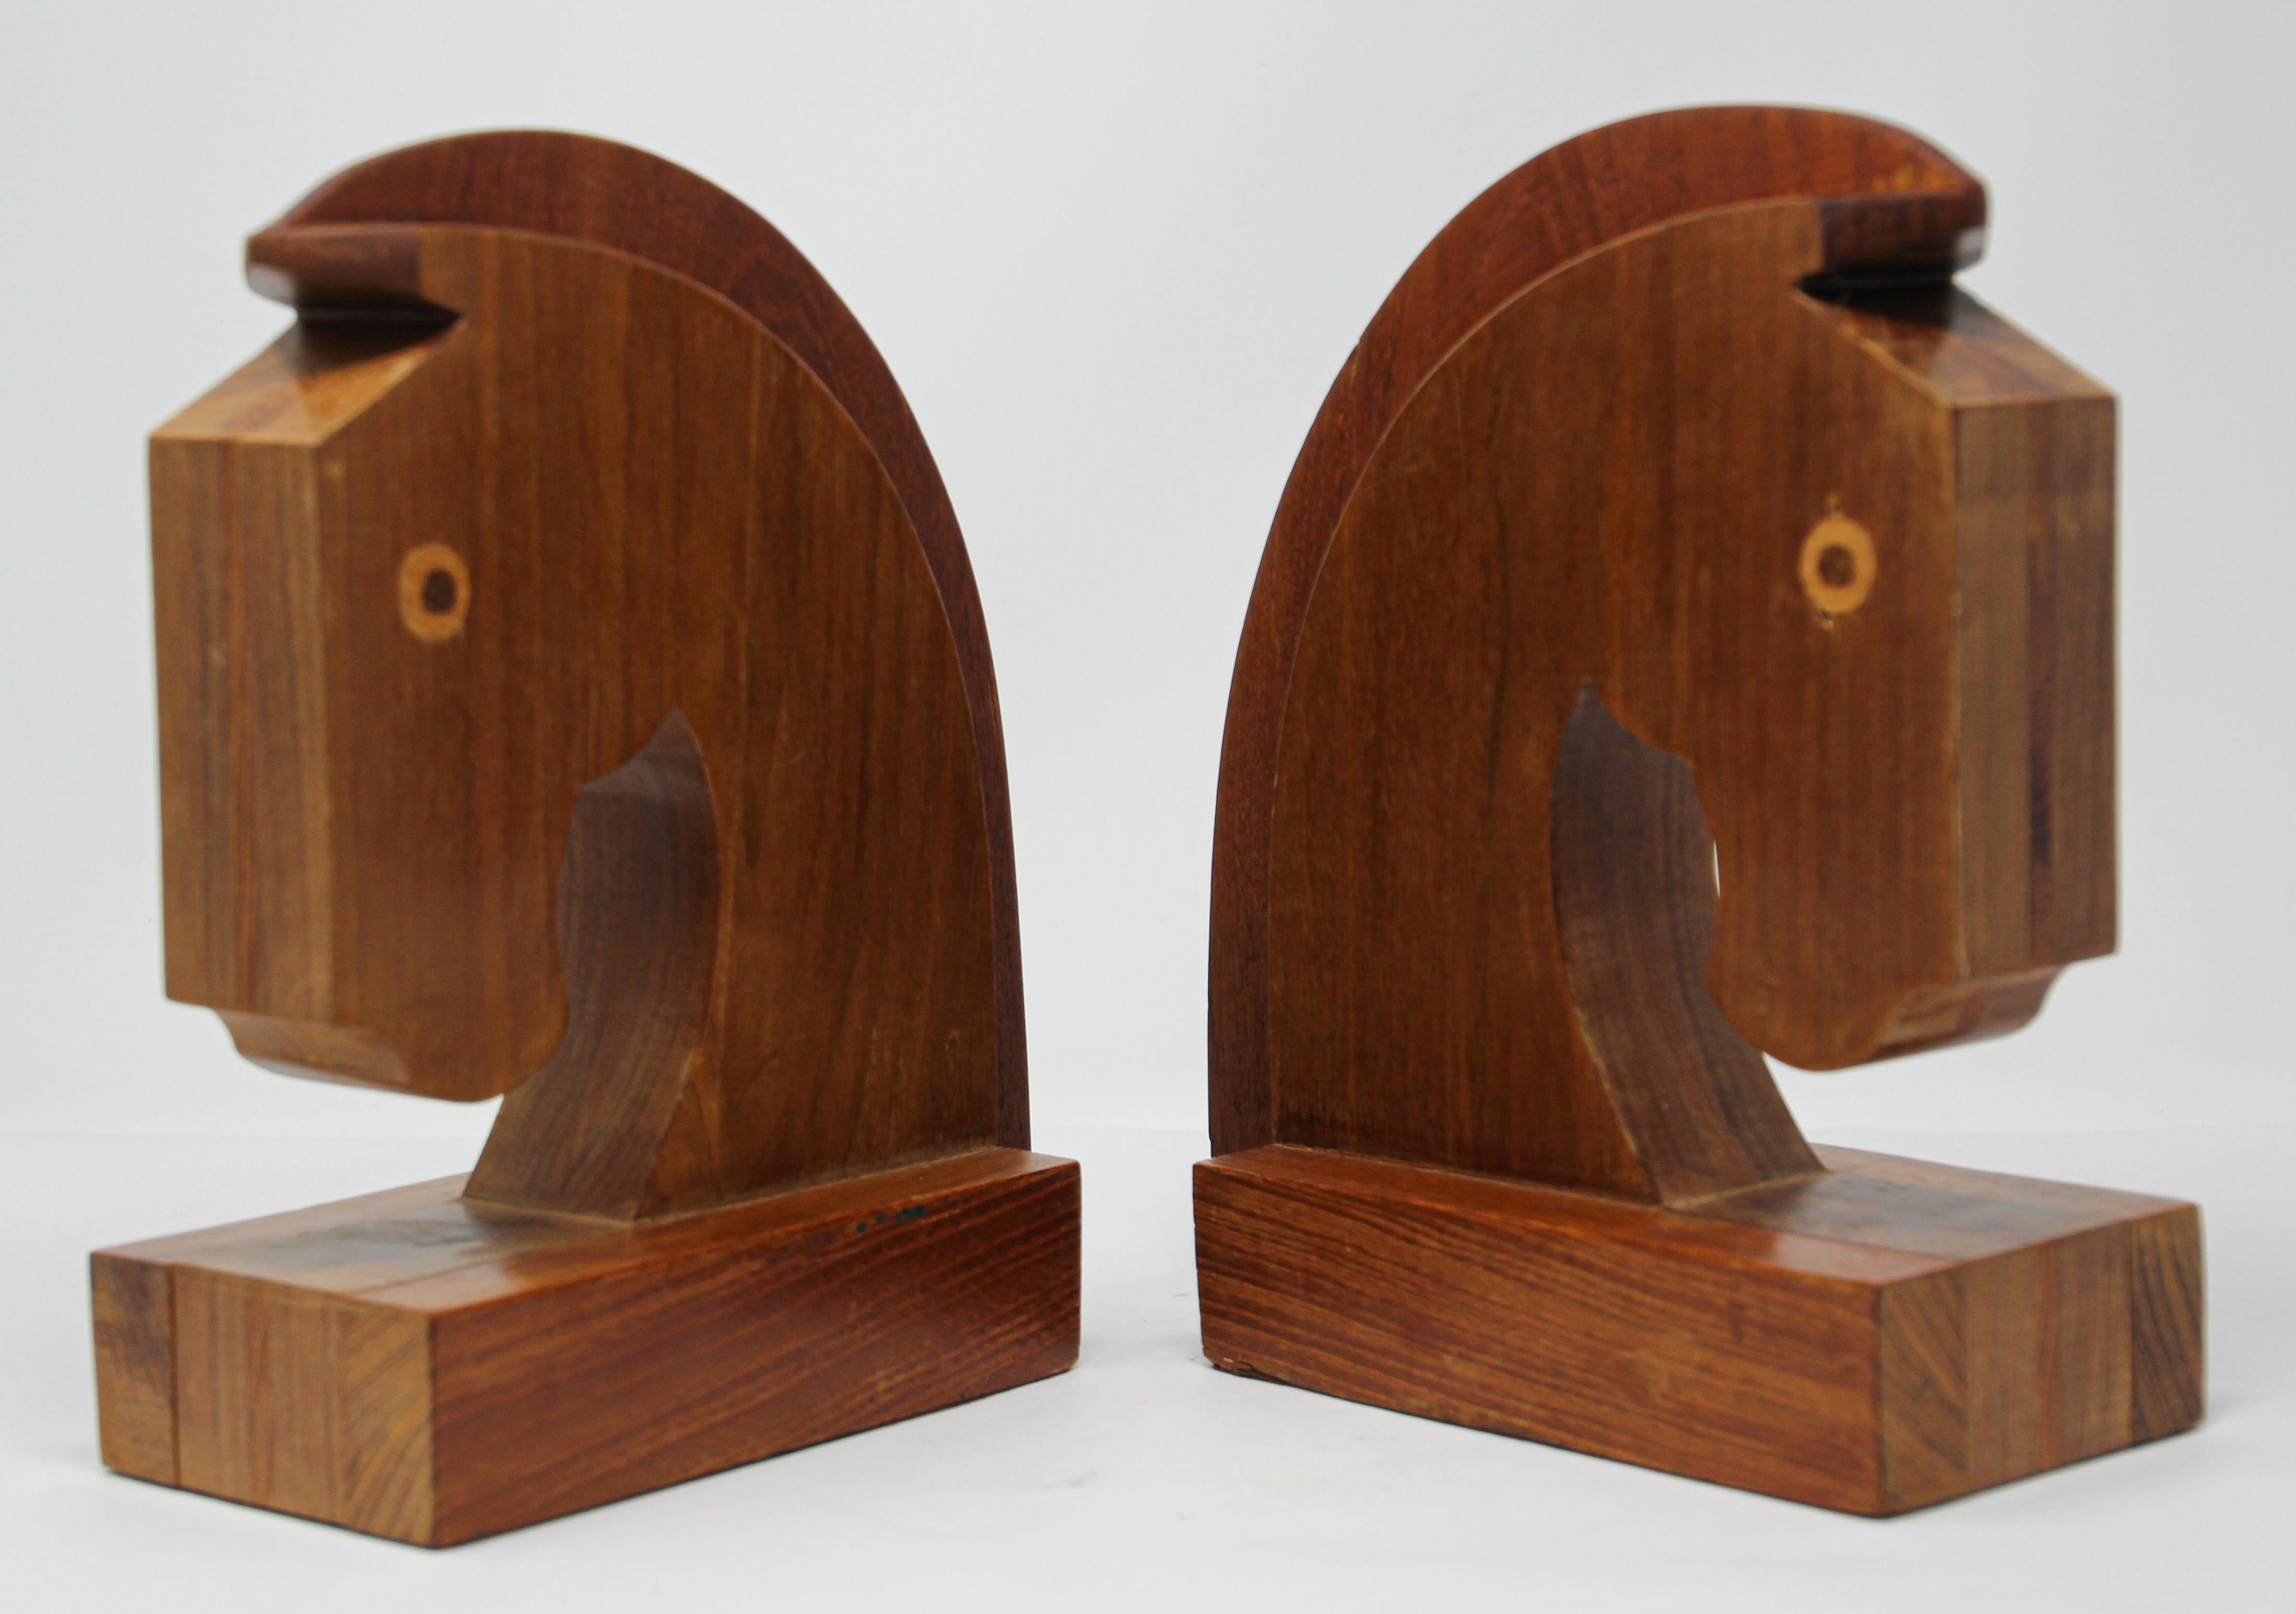 Art Deco Stylized Wood Sculptures of Horse Bust Bookends For Sale 6